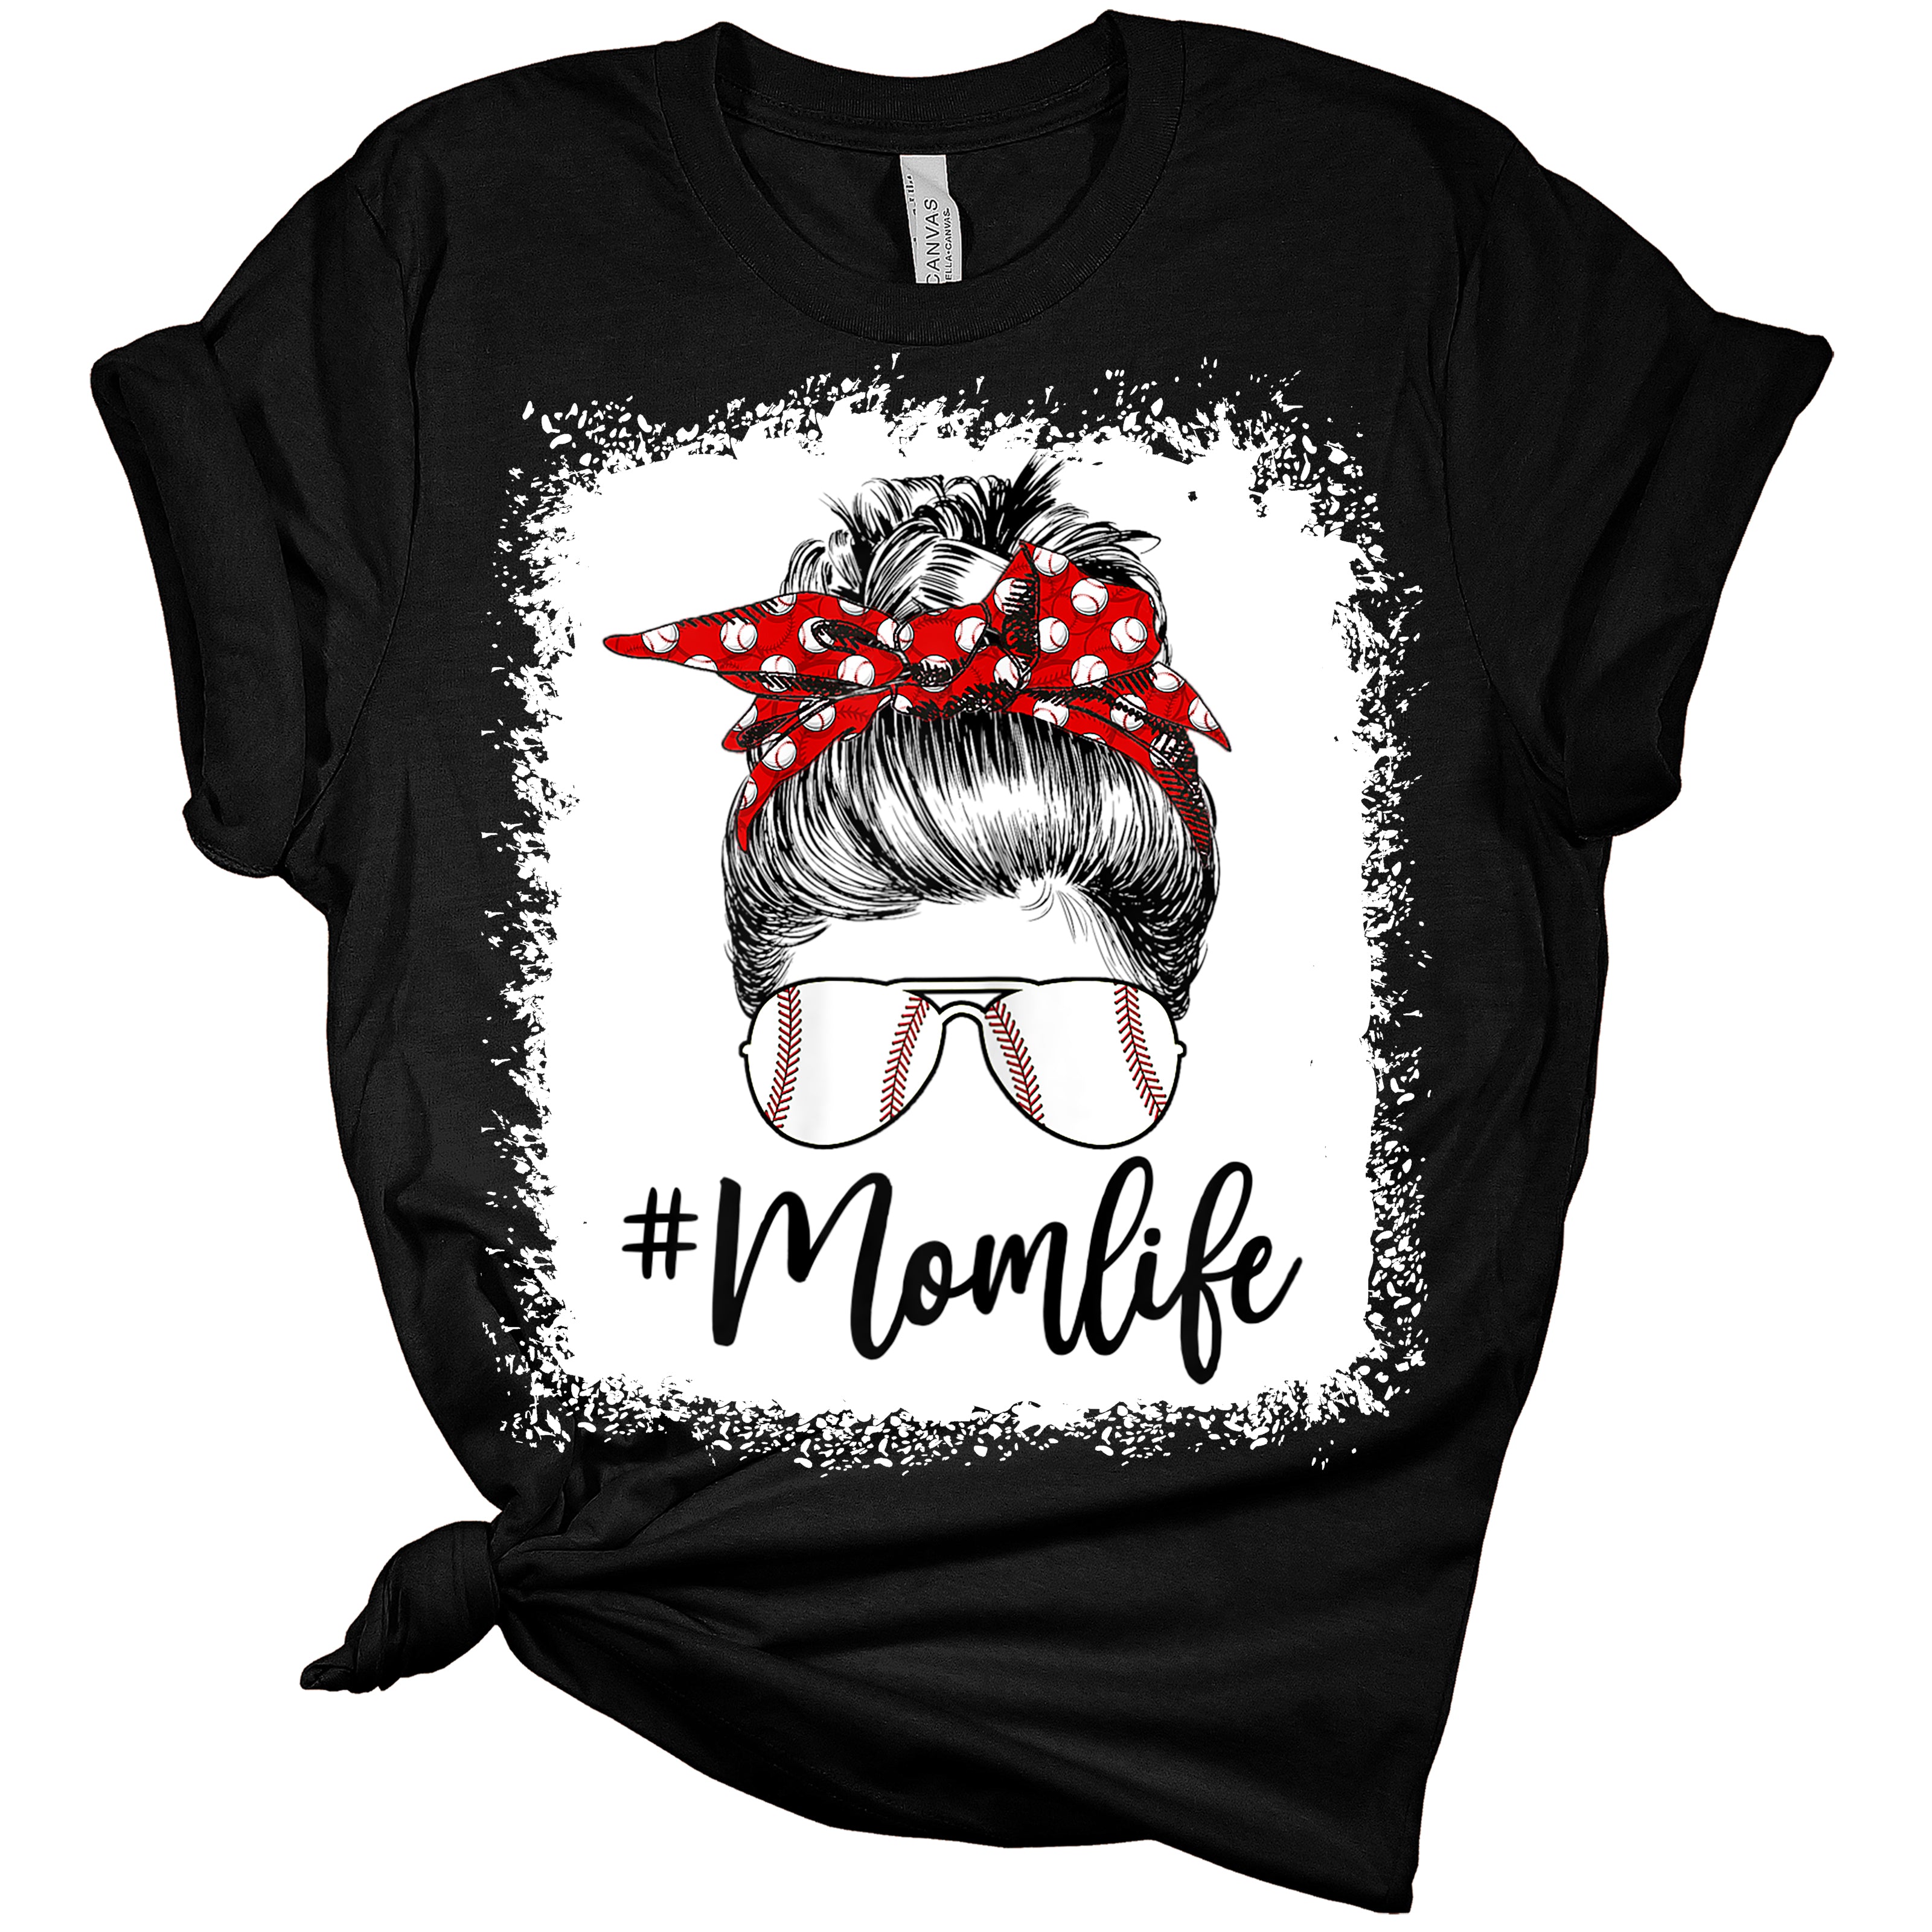 Baseball Shirt Women Take Me Out to The Ball Game Baseball Mom Shirt Cute  Baseball Heart Tee Shirt Summer Graphic Tops at  Women’s Clothing